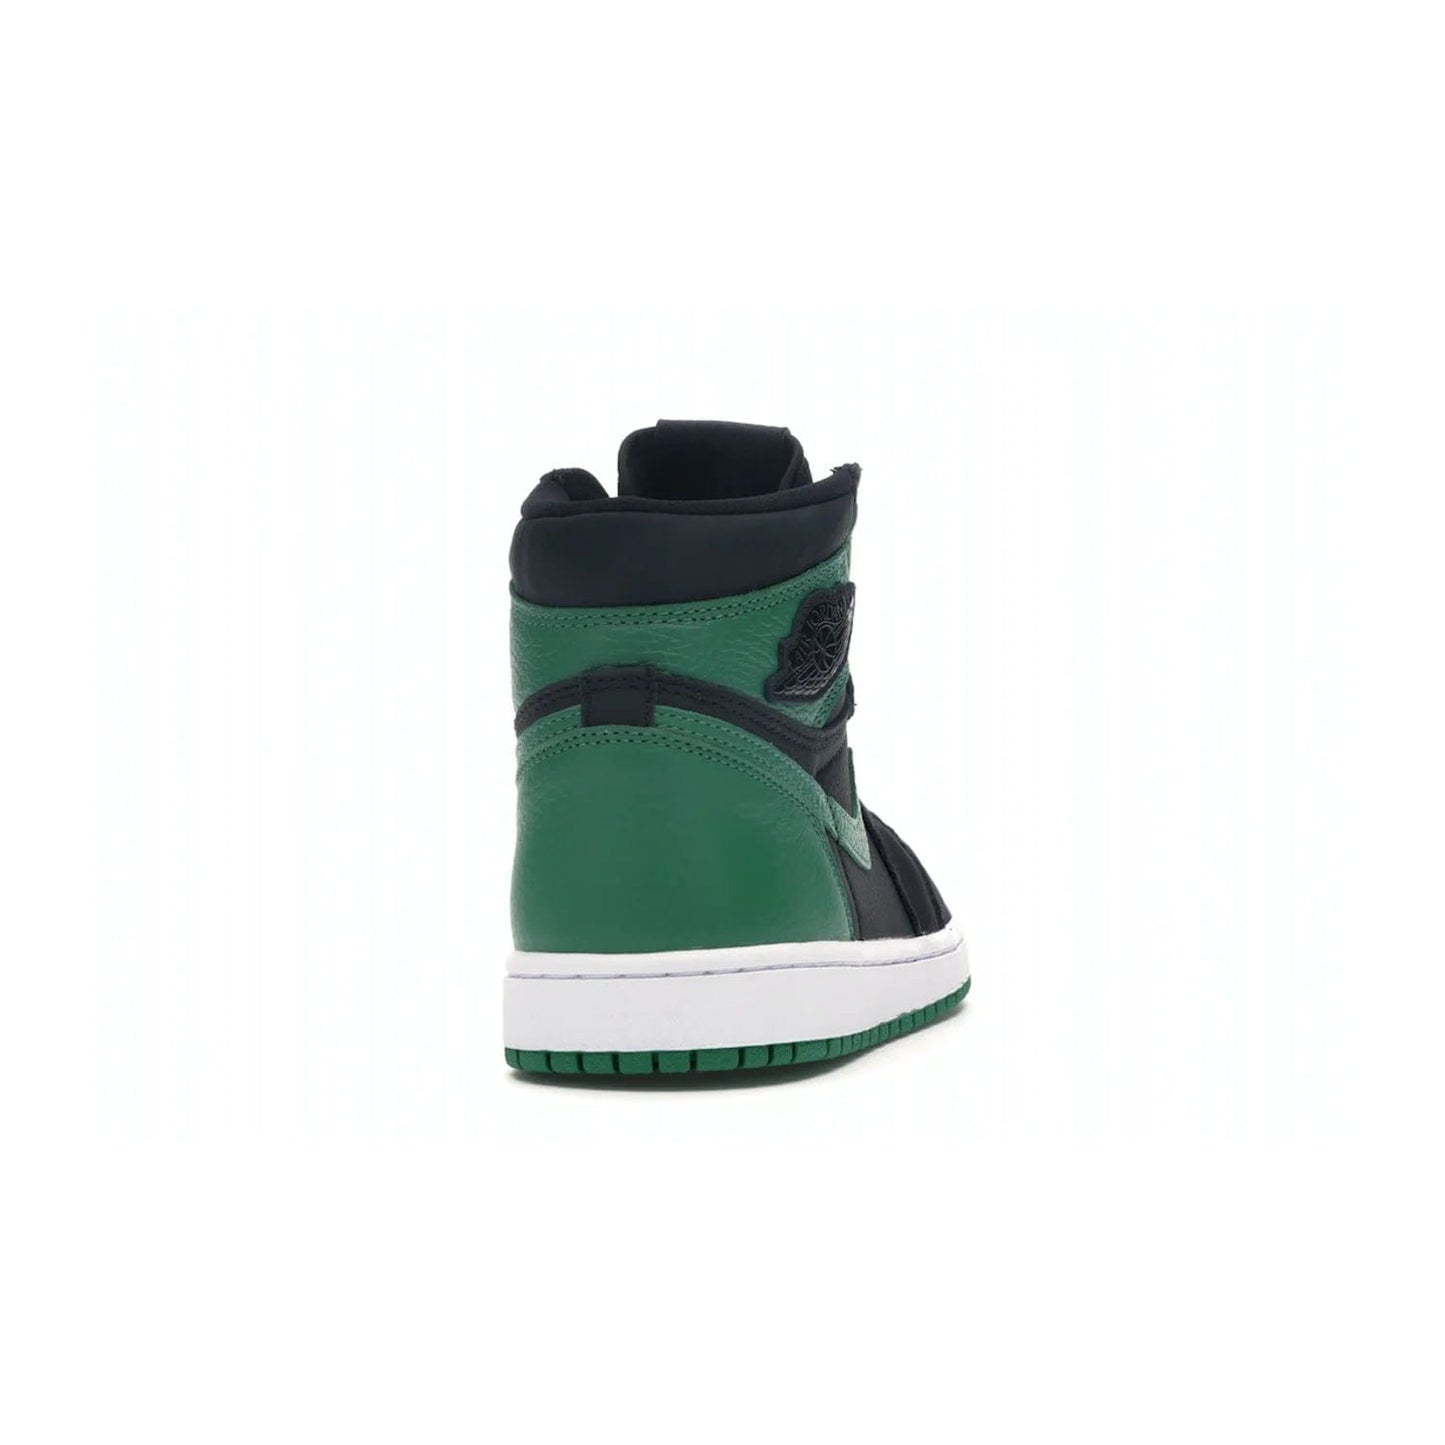 Jordan 1 Retro High Pine Green Black - Image 29 - Only at www.BallersClubKickz.com - Step into fresh style with the Jordan 1 Retro High Pine Green Black. Combining a black tumbled leather upper with green leather overlays, this sneaker features a Gym Red embroidered tongue tag, sail midsole, and pine green outsole for iconic style with a unique twist.